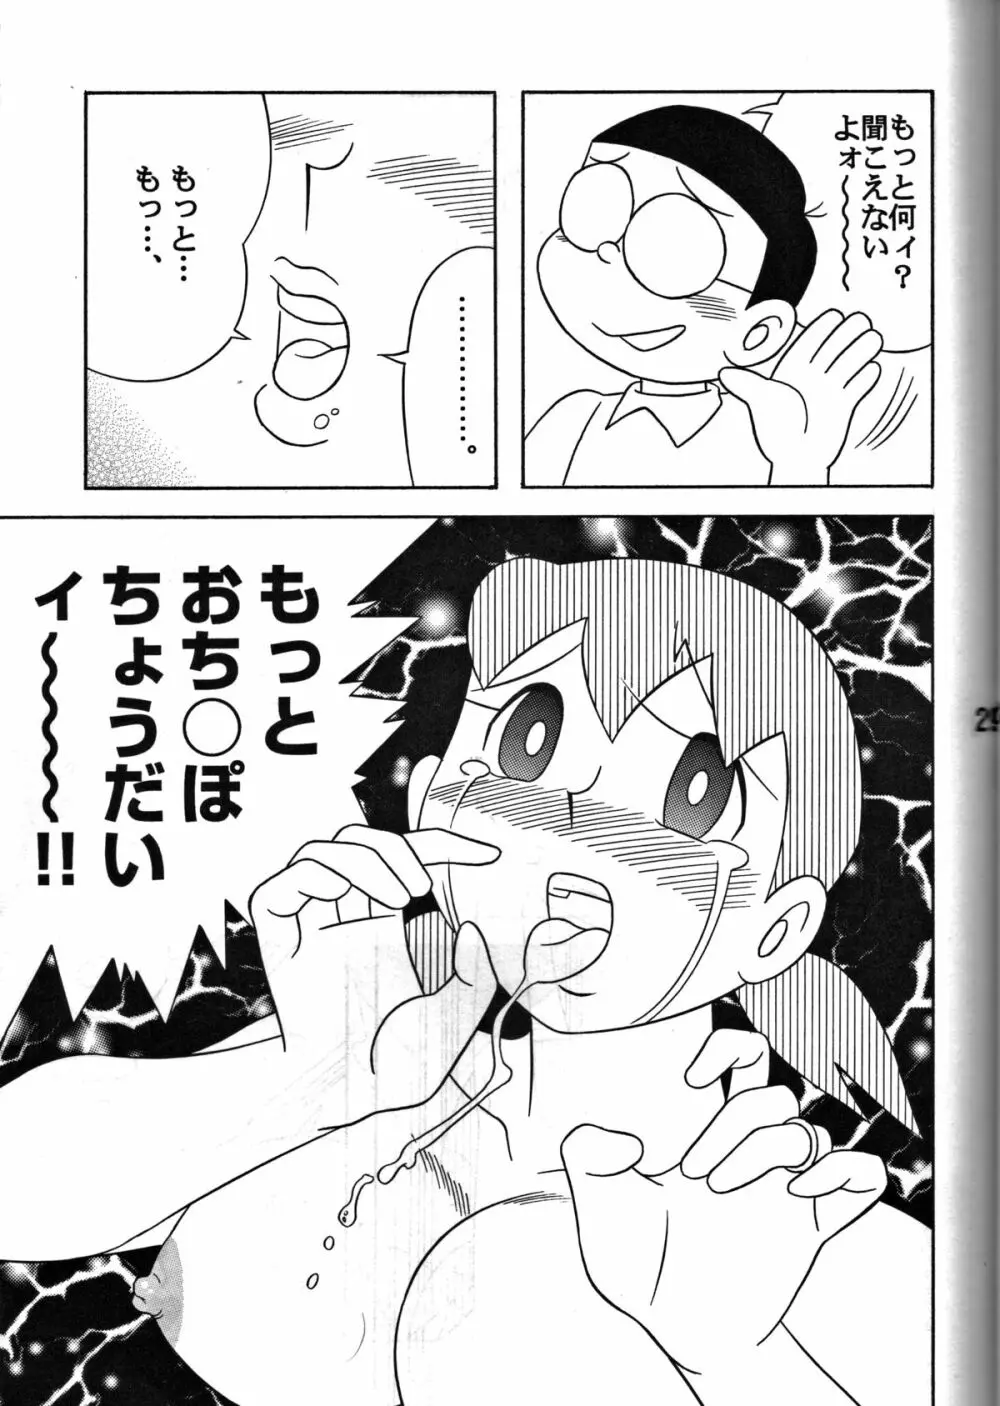 Twin Tail Vol. 7 Extra - Fancy Woman - page26